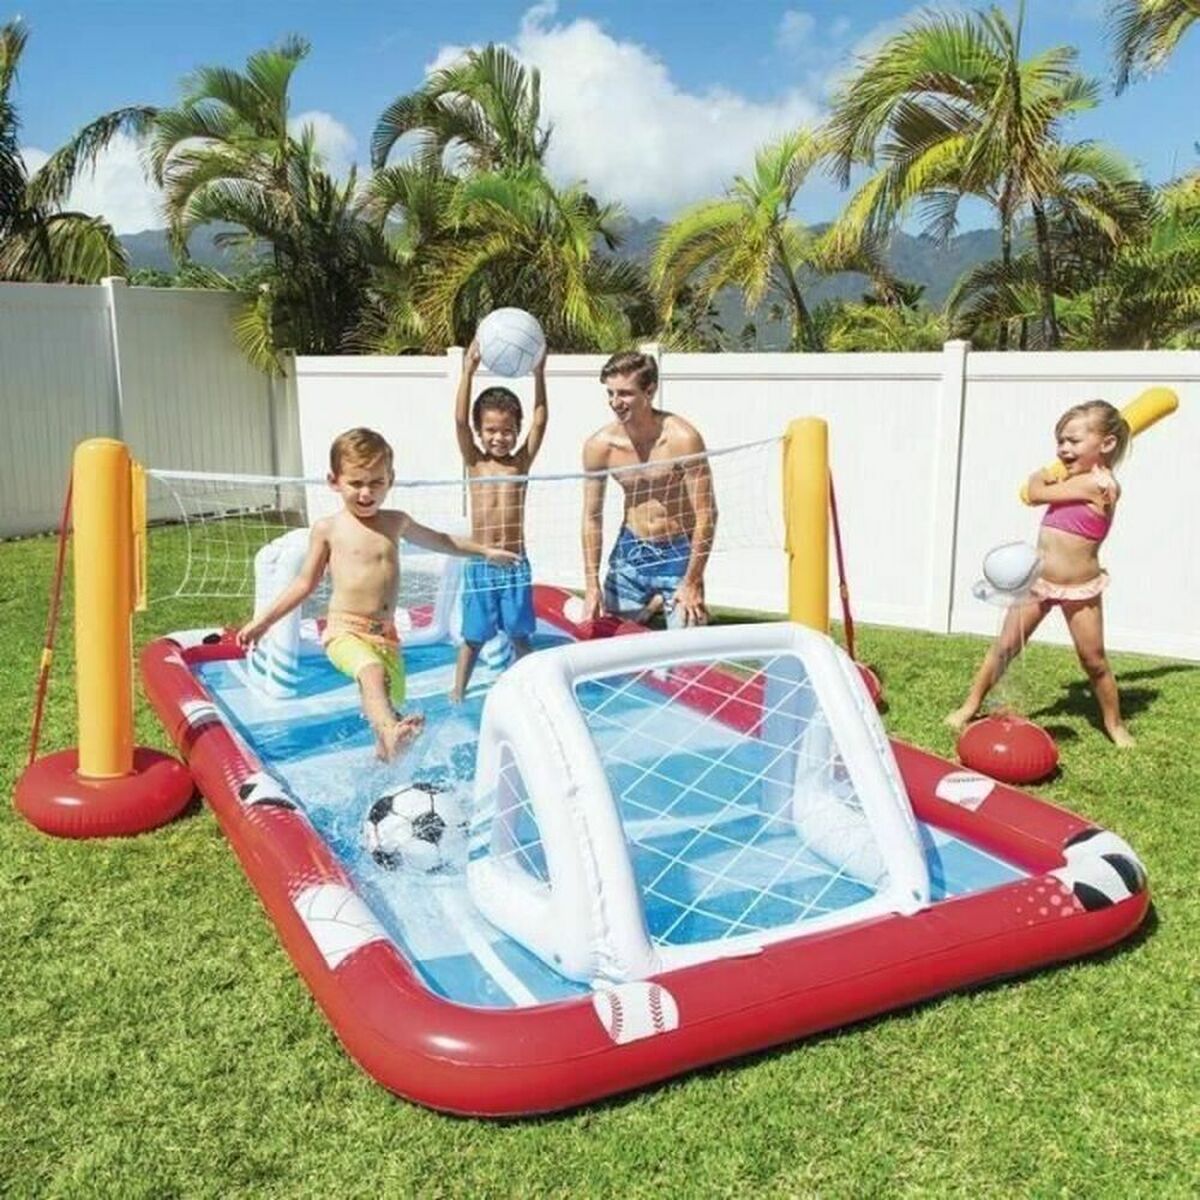 Inflatable Paddling Pool for Children Intex Sports Games 470 l (325 x 267 x 102 cm)